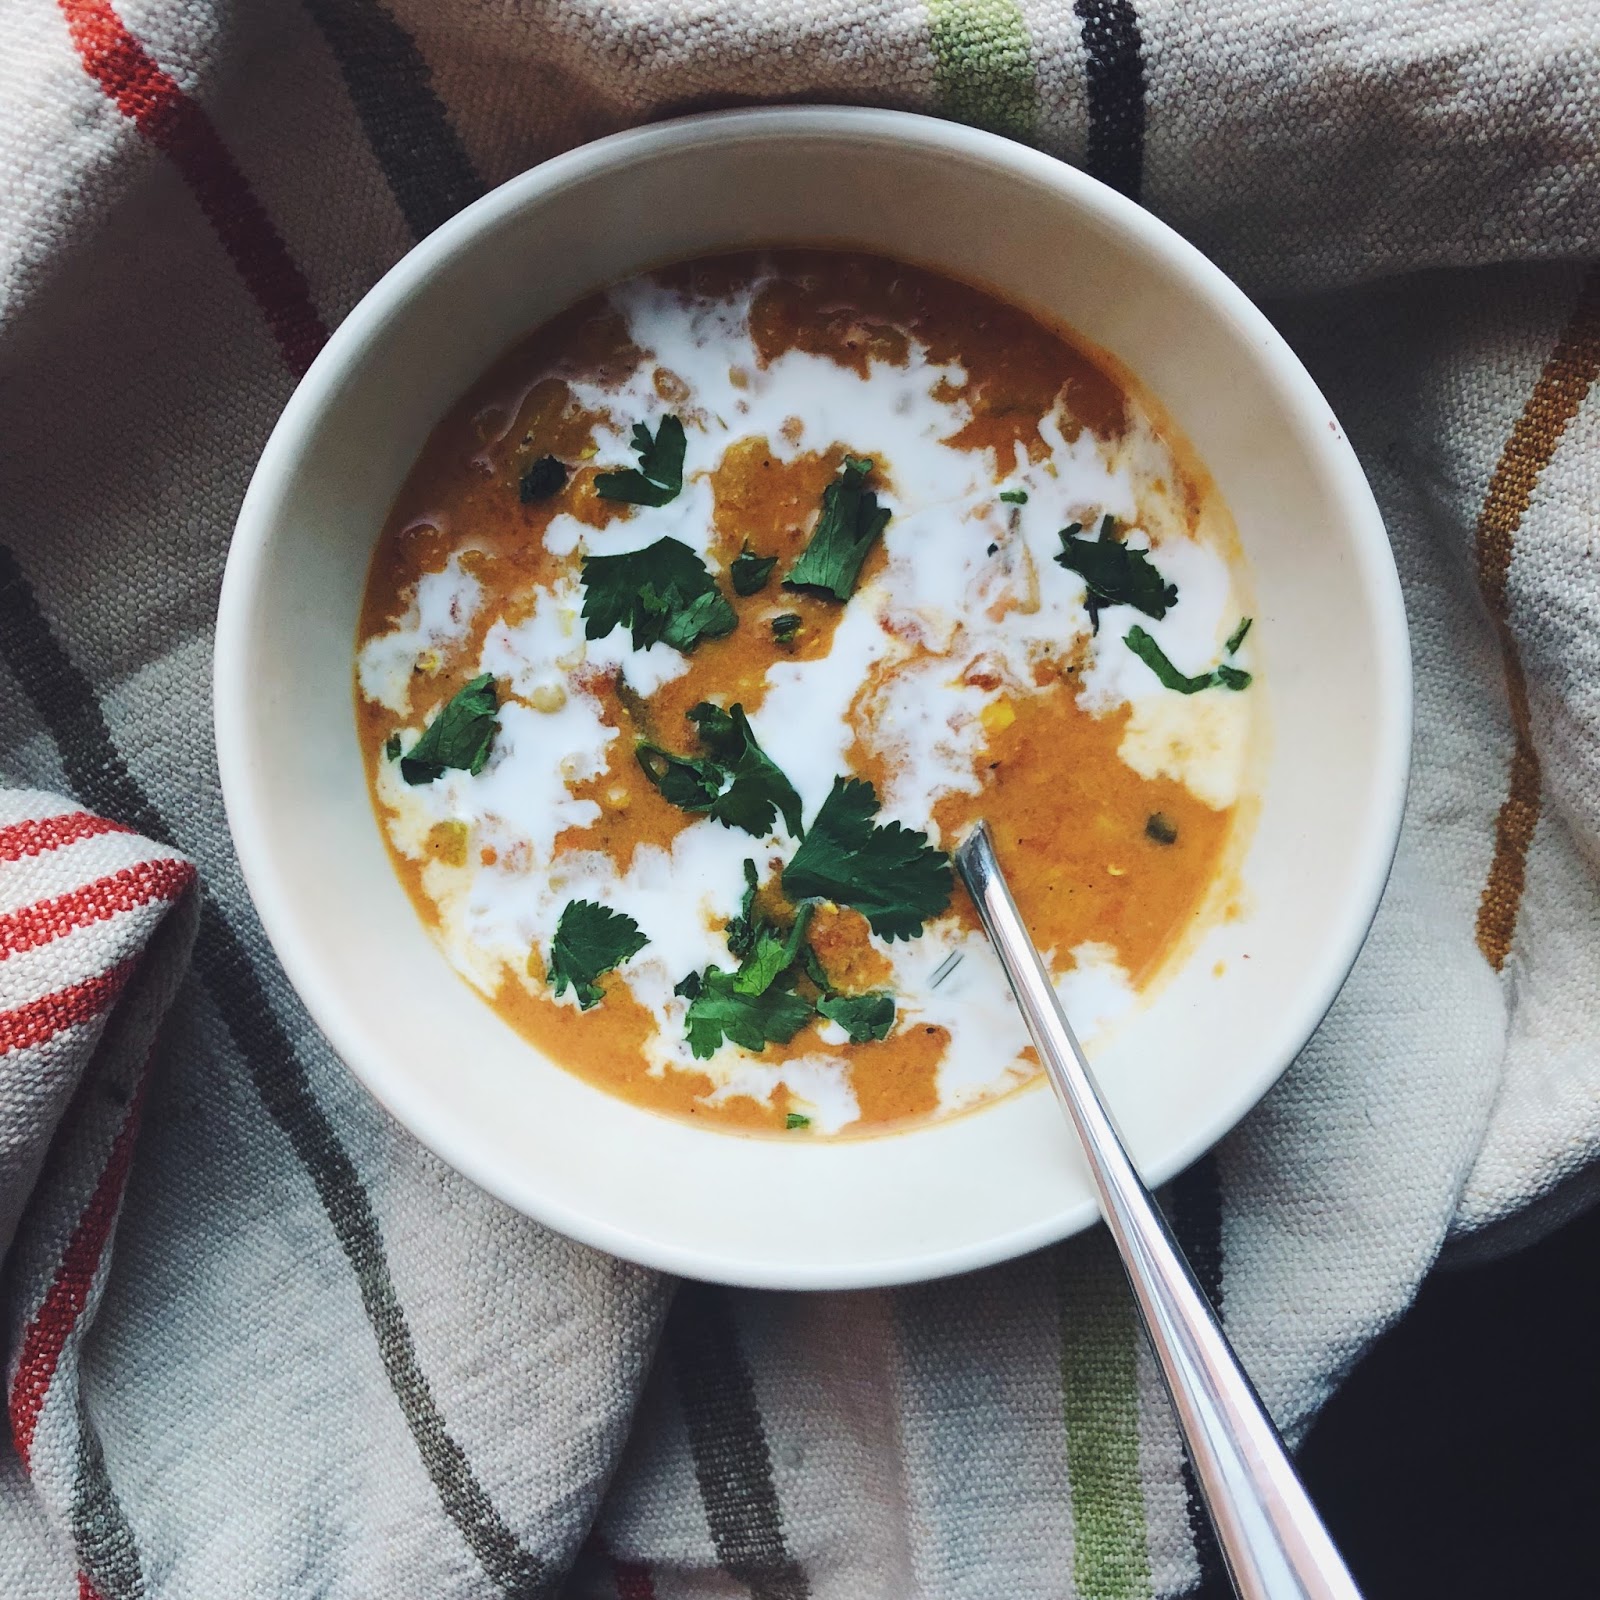 amour fou(d): curried lentil, tomato, and coconut soup.